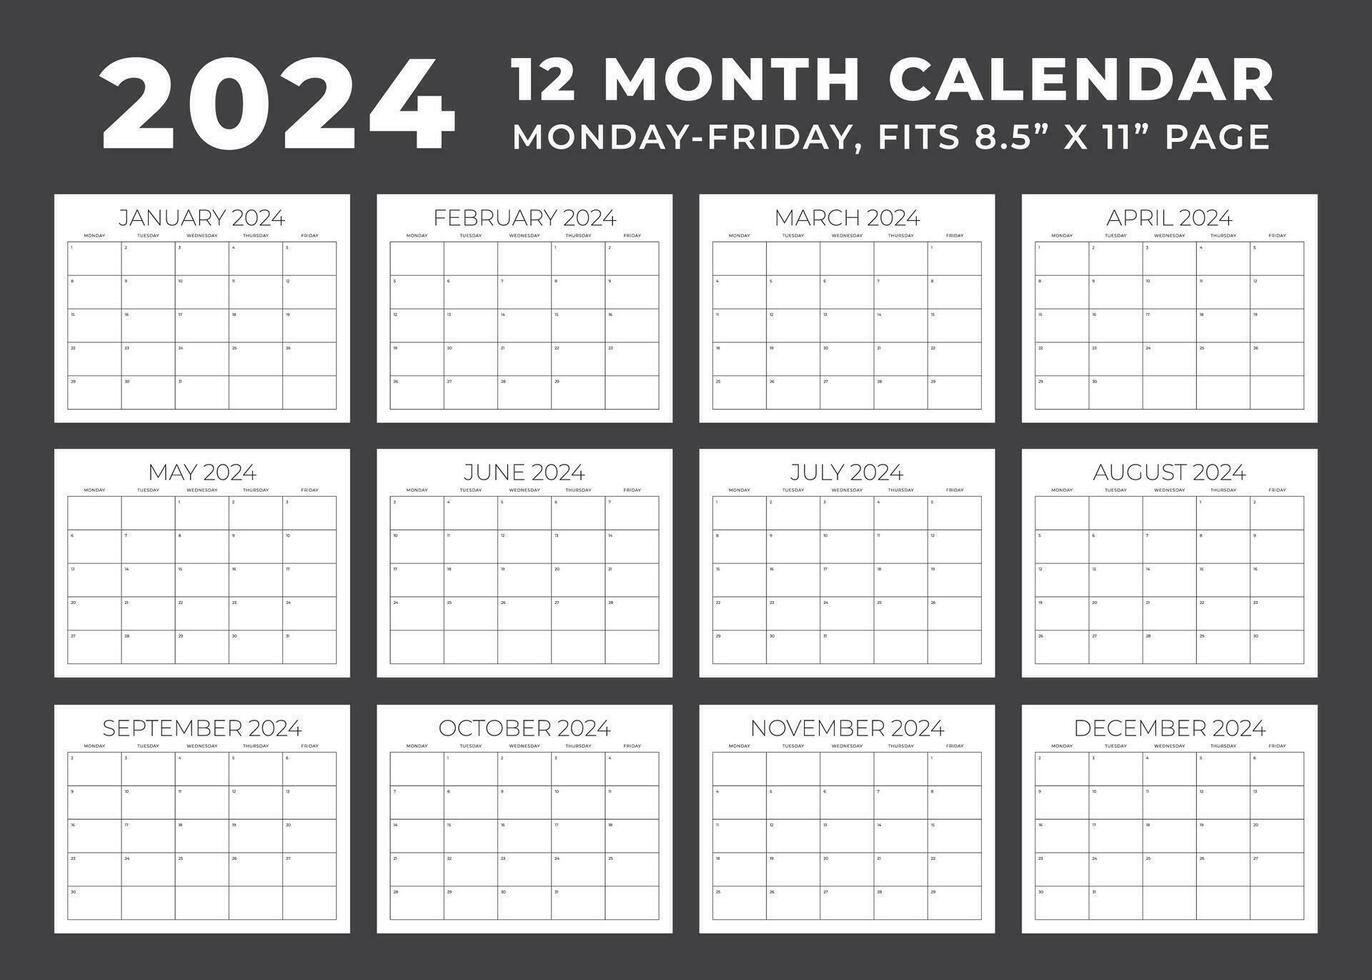 Calendar template for 2024. Monday to Friday. 12 Month Calendar. Blank Calendar Months. Fit Letter Size Pages. Stationery design. Vector illustration.